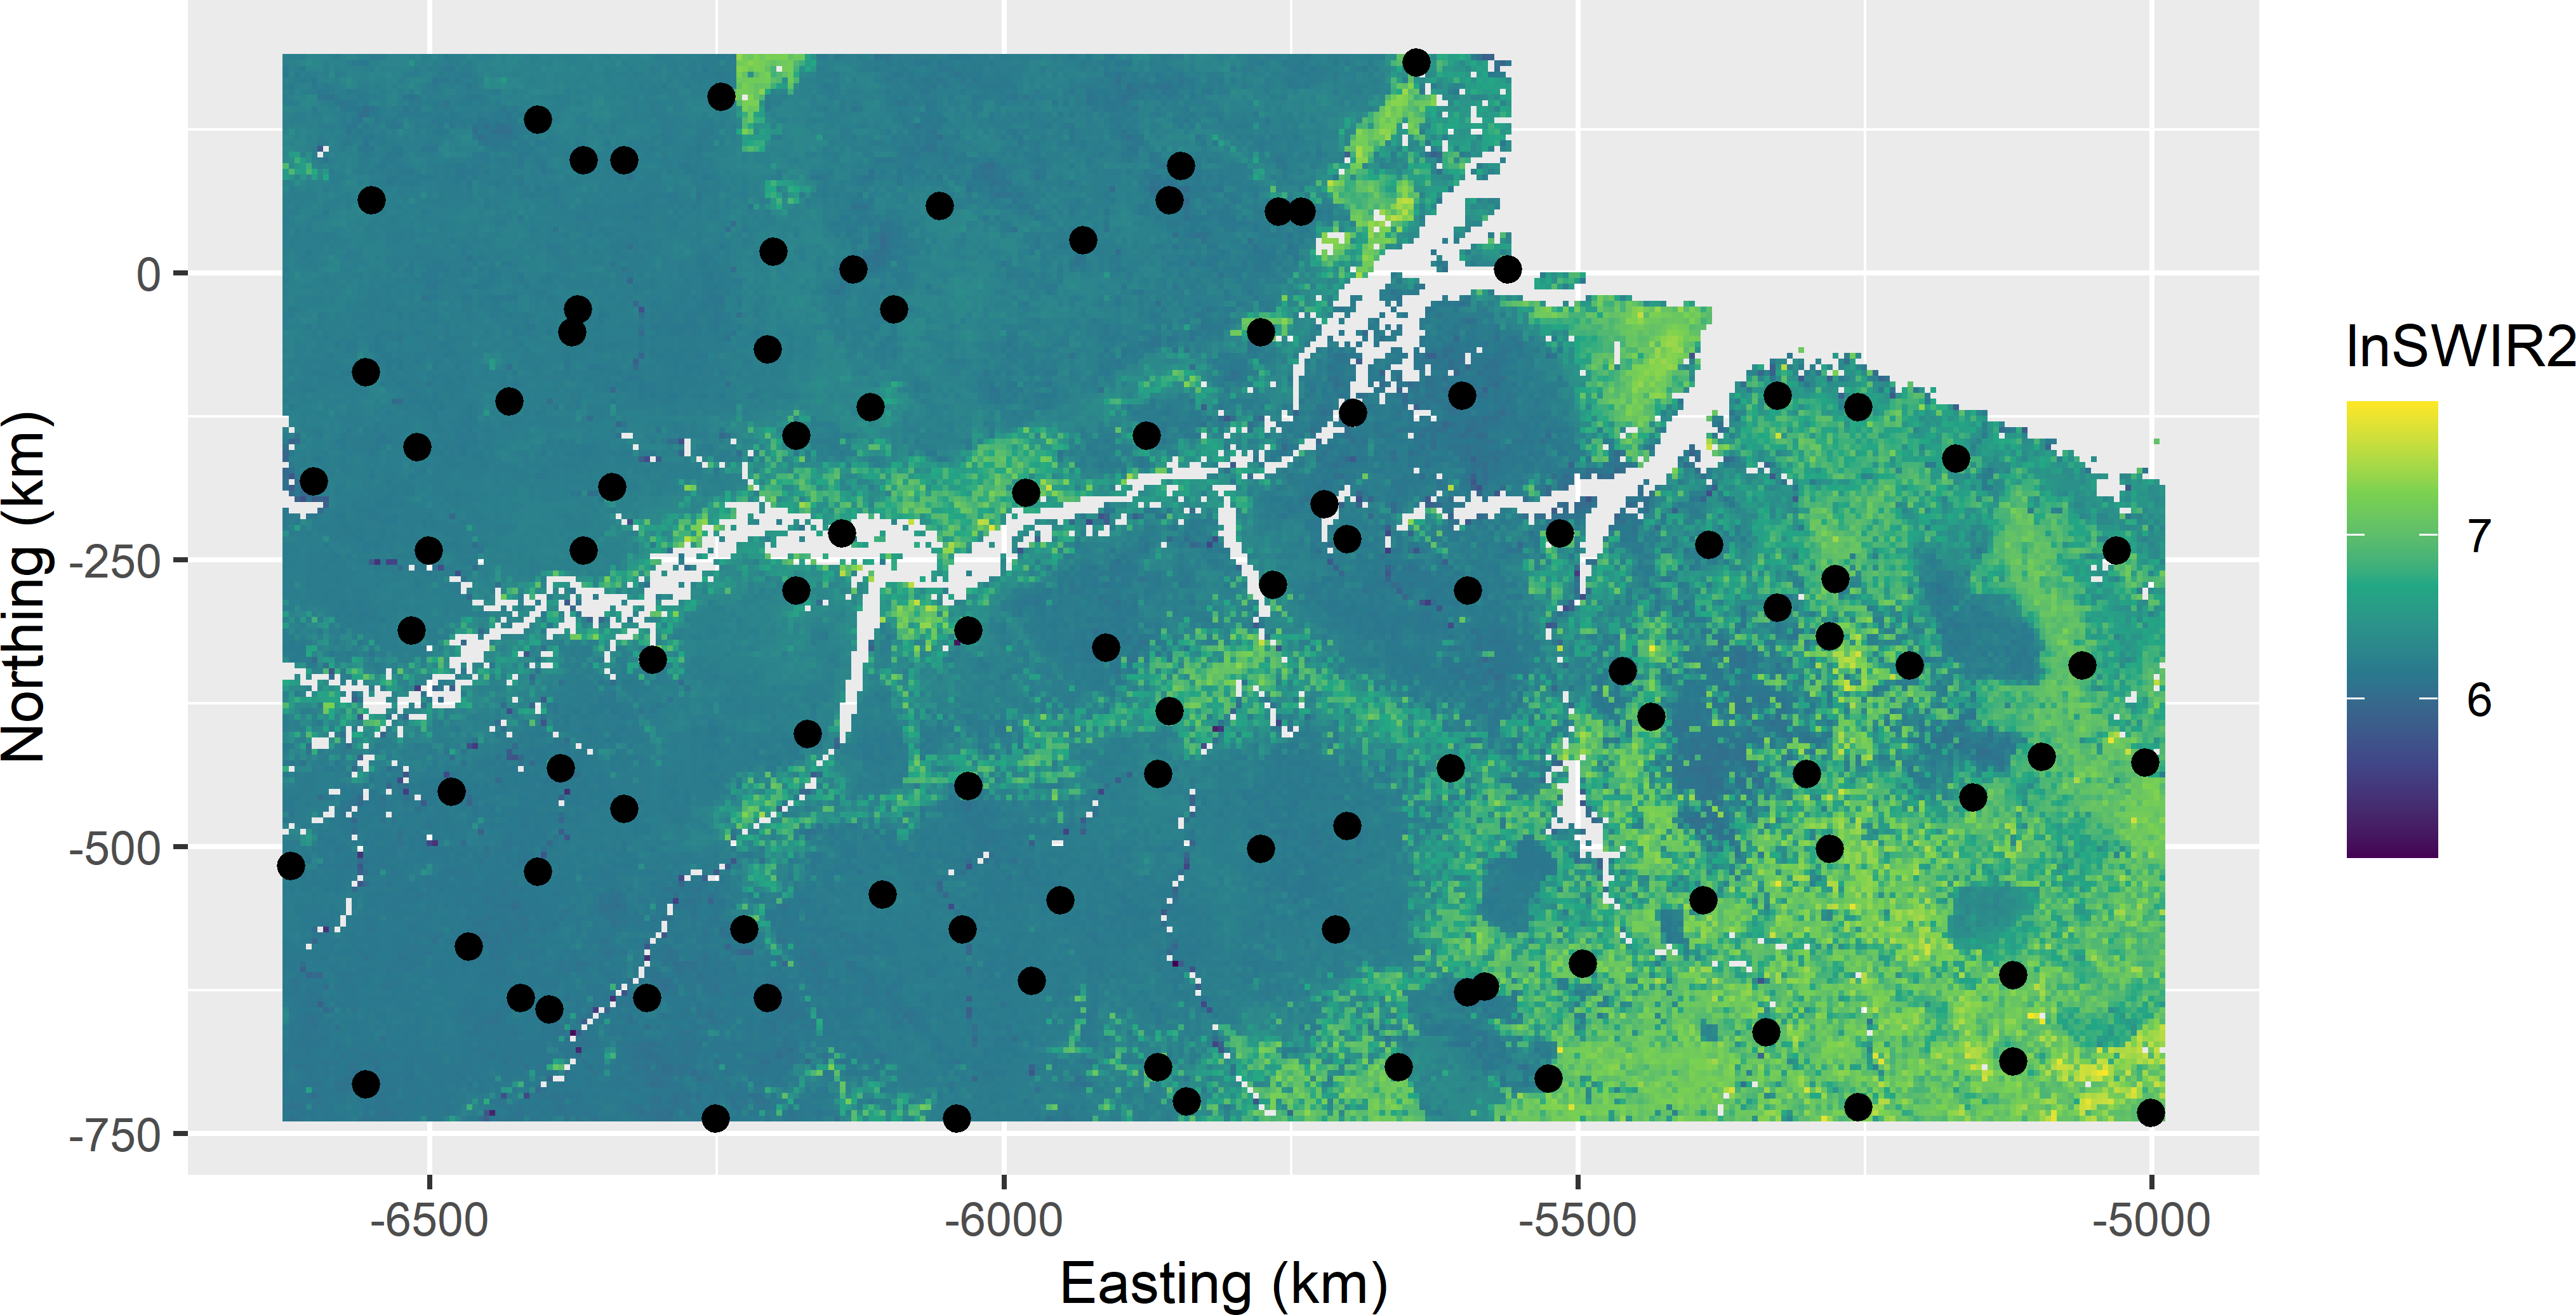 Sample balanced on lnSWIR2 with geographical spreading from Eastern Amazonia.